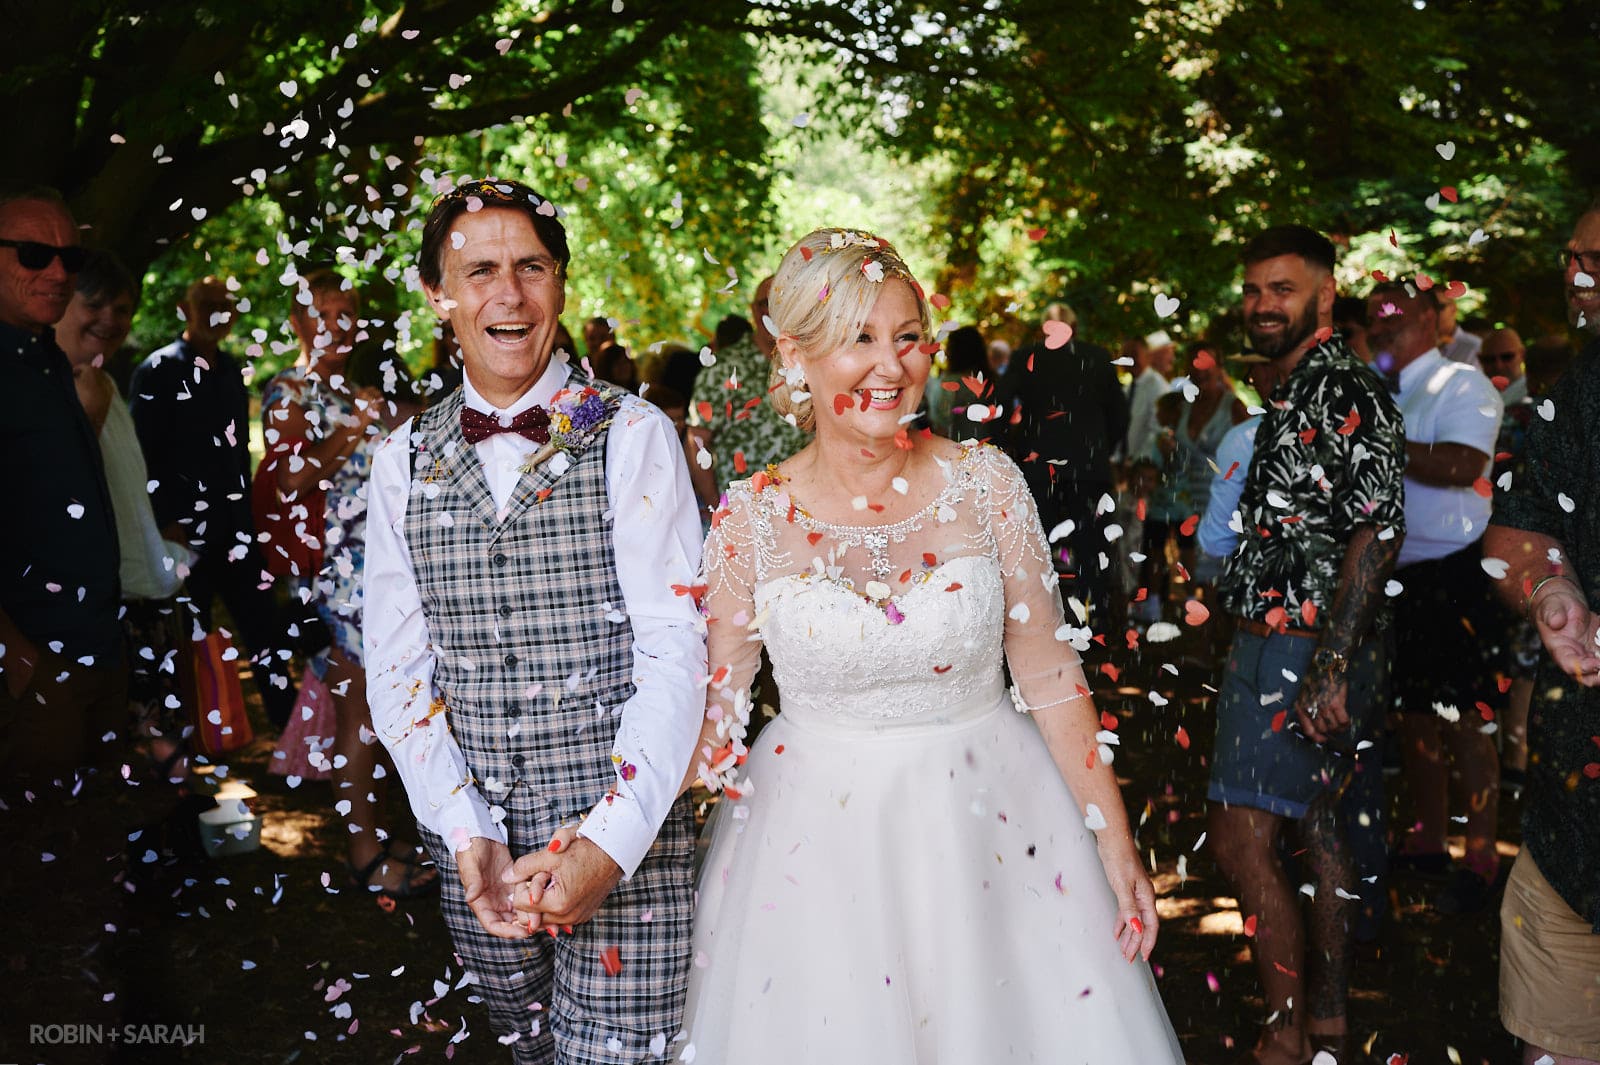 Bride and groom walk through confetti throw during outdoor wedding ceremony at Oakfield Gardens